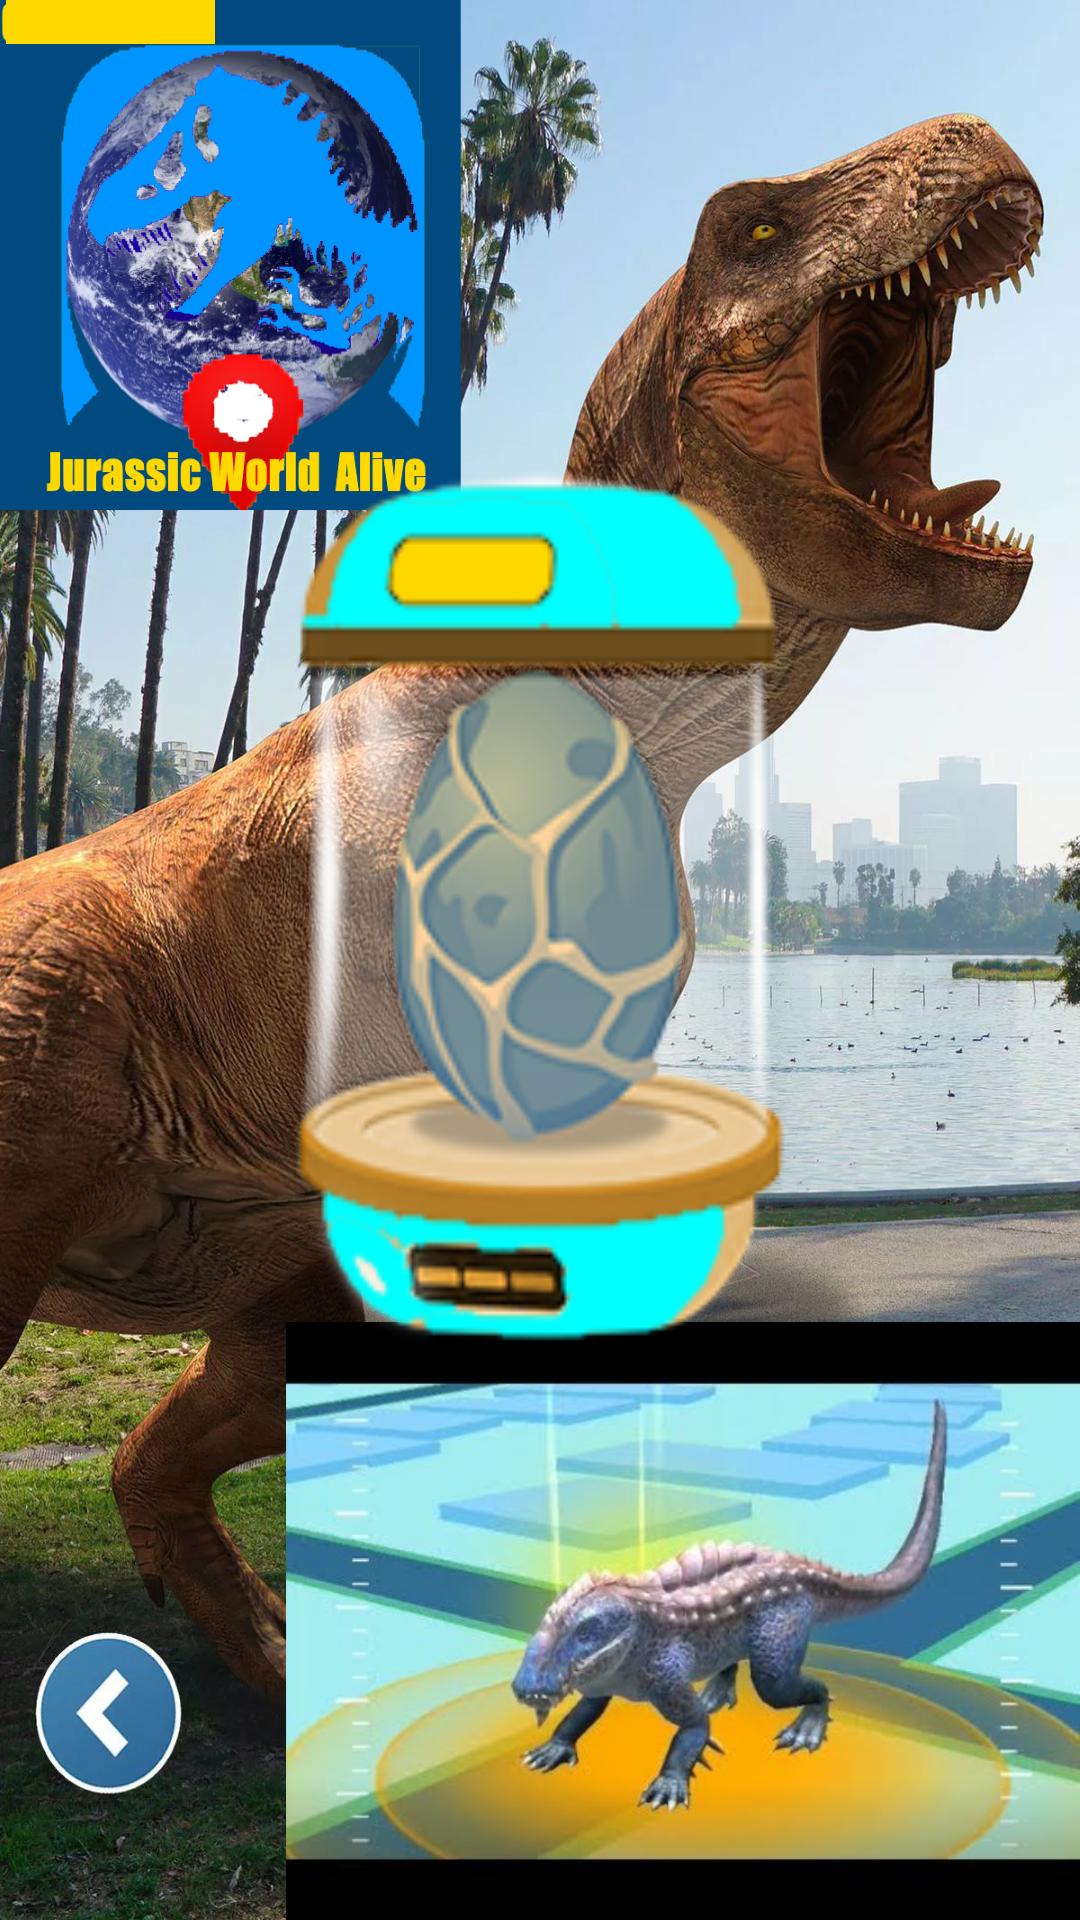 Jurassic World Alive Hatching Egg For Android Apk Download Download the latest version of jurassic world alive for android. jurassic world alive hatching egg for